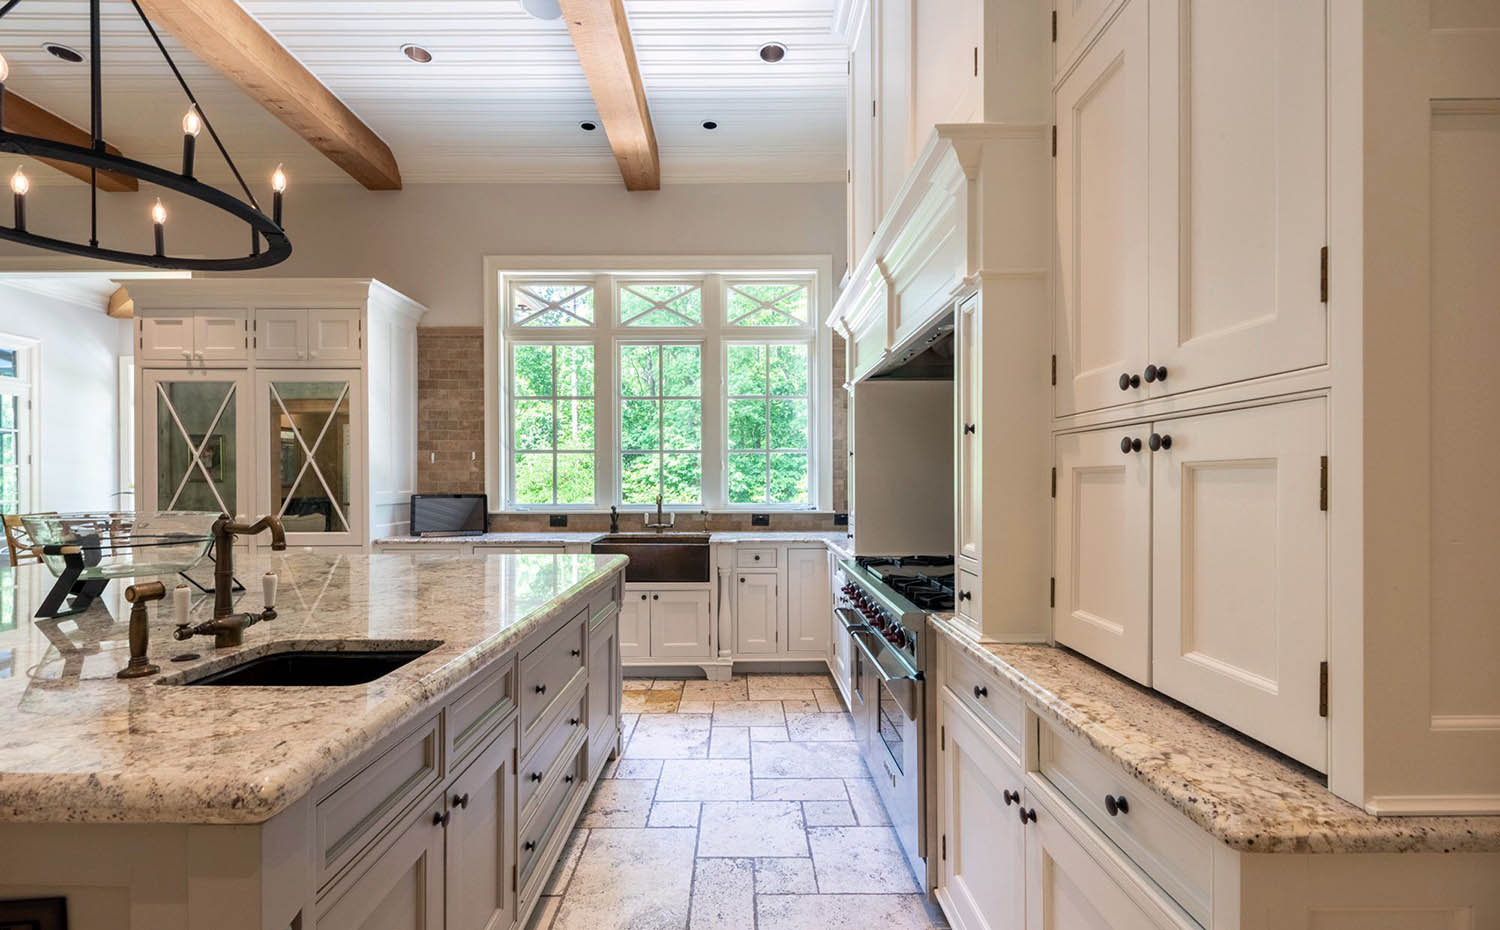 Beautiful cream colored kitchen cabinets with real wood ceiling beams, granite countertops and stone tile backsplash. Black knobs.